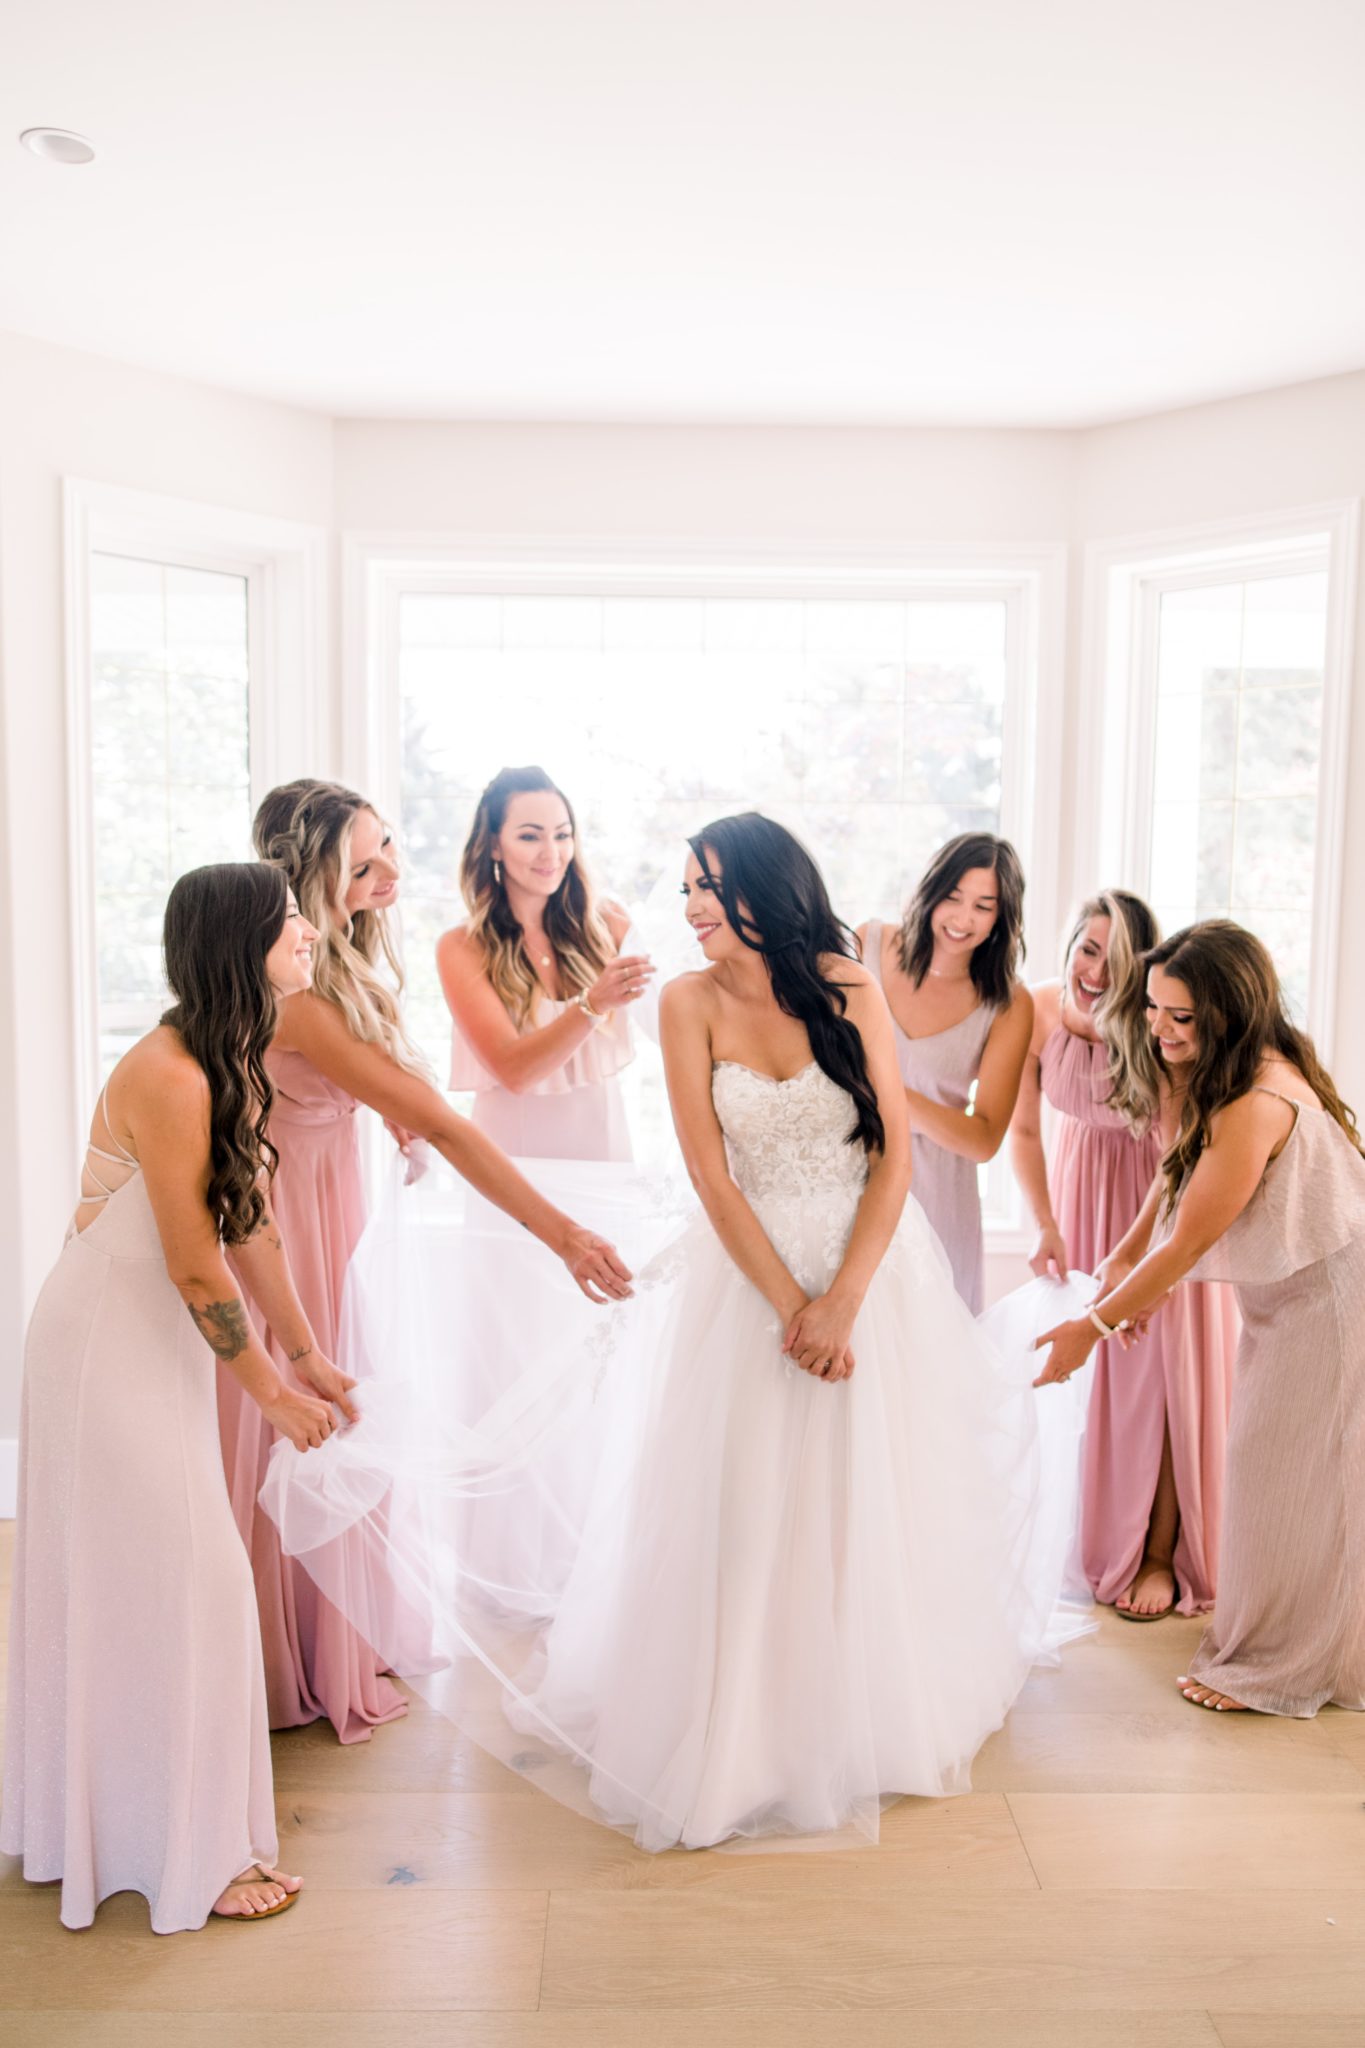 The importance of your getting ready Location - Alyssa Lynne Photography